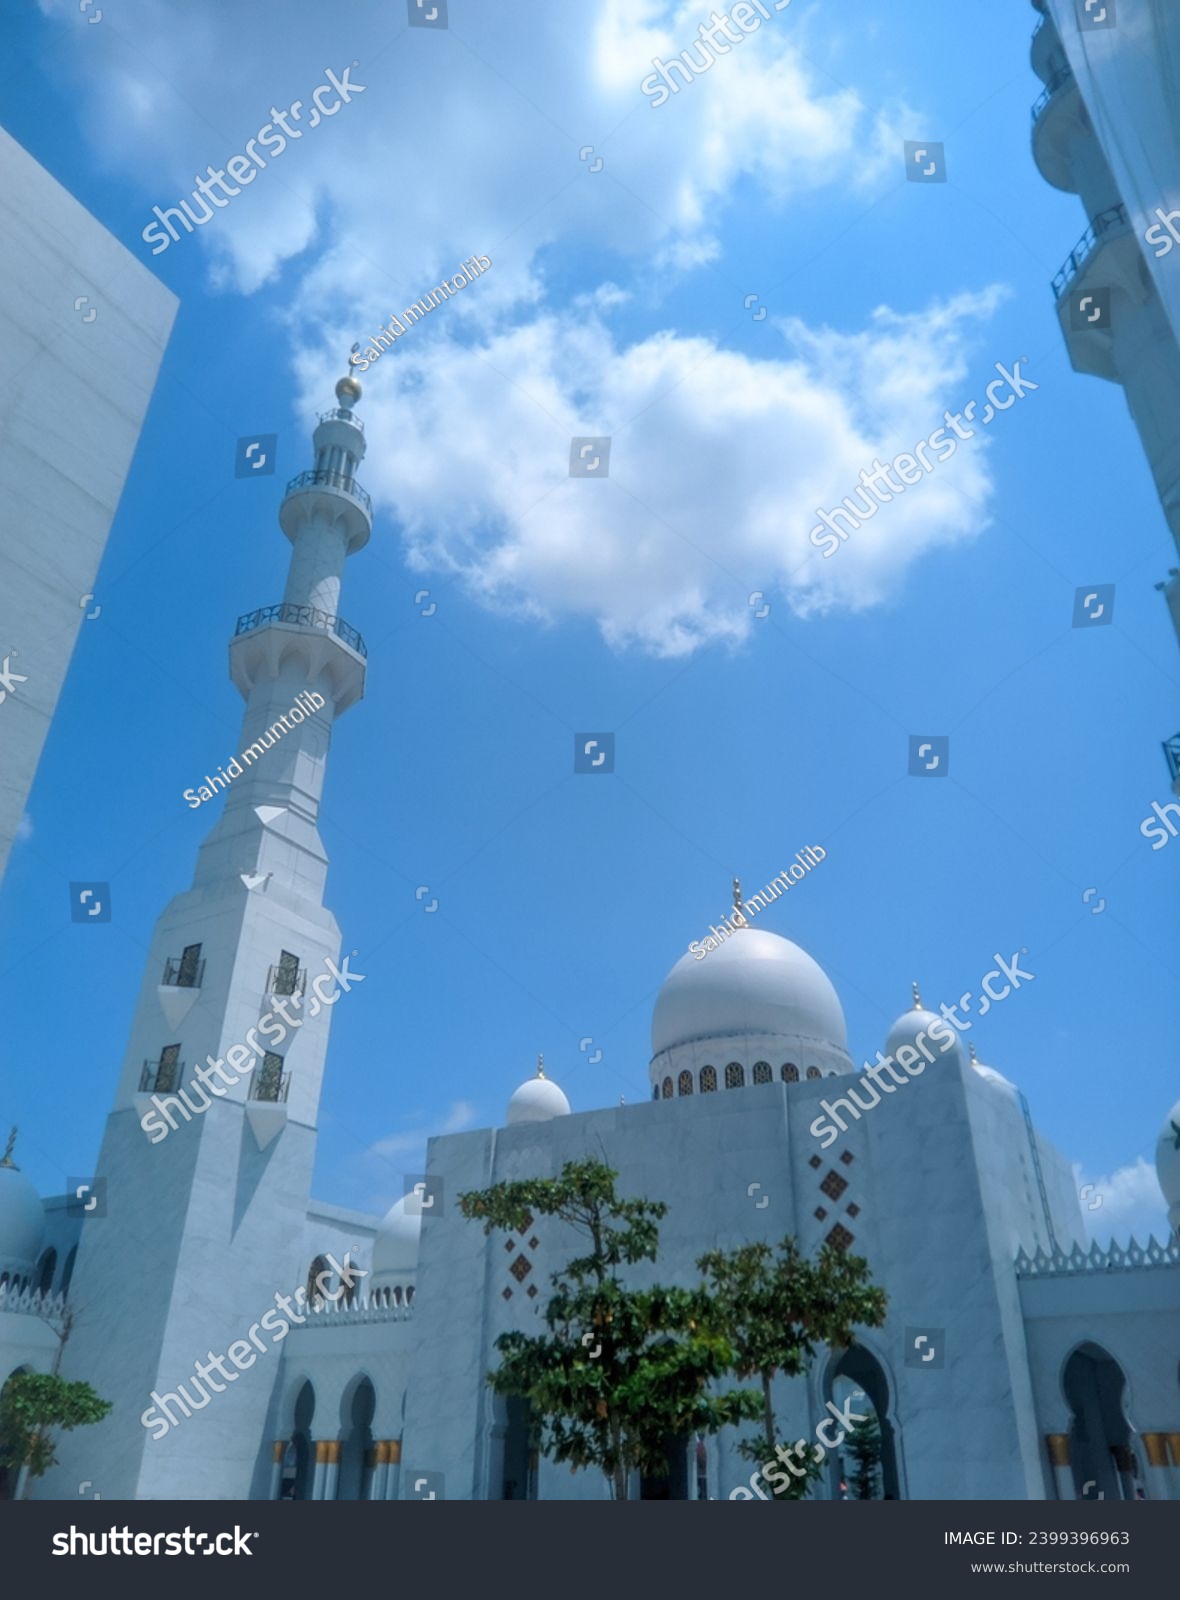 You can see the mosque dome and mosque tower high in the bright blue sky and white clouds of the Syech Zayed mosque building in Solo, Central Java, Indonesia  #2399396963